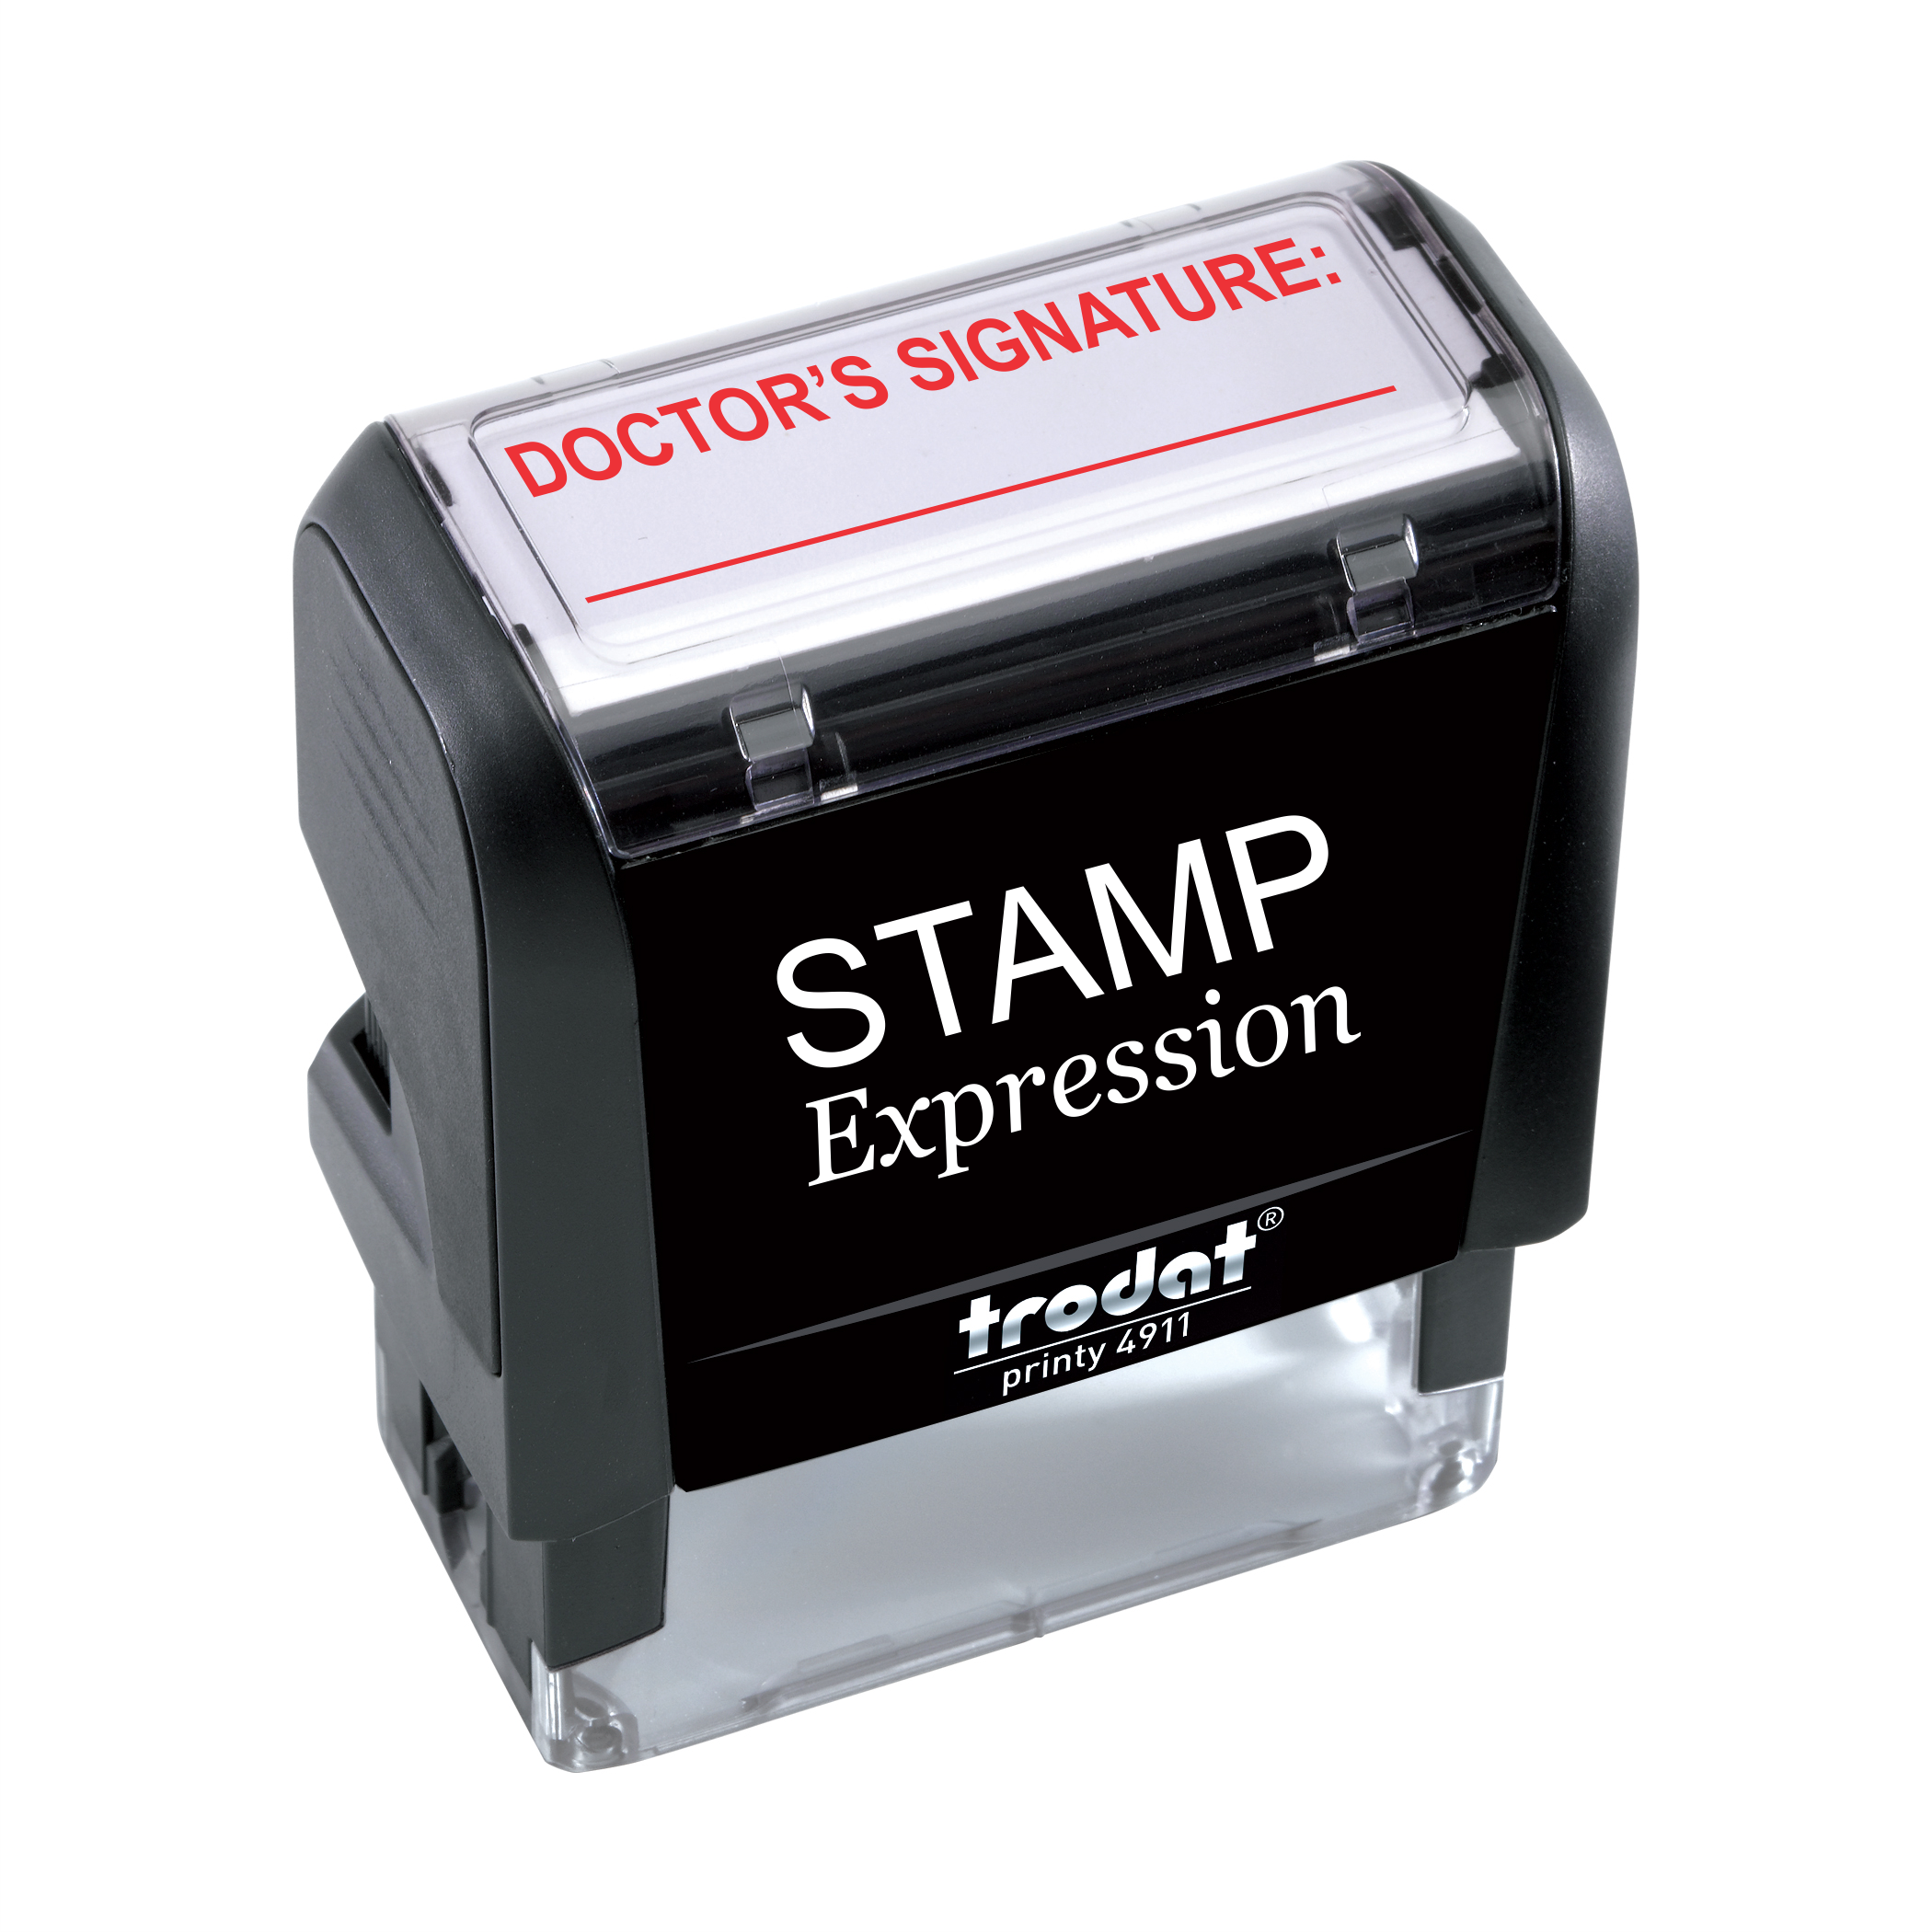 Doctor's Signature Medical Self Inking Rubber Stamp